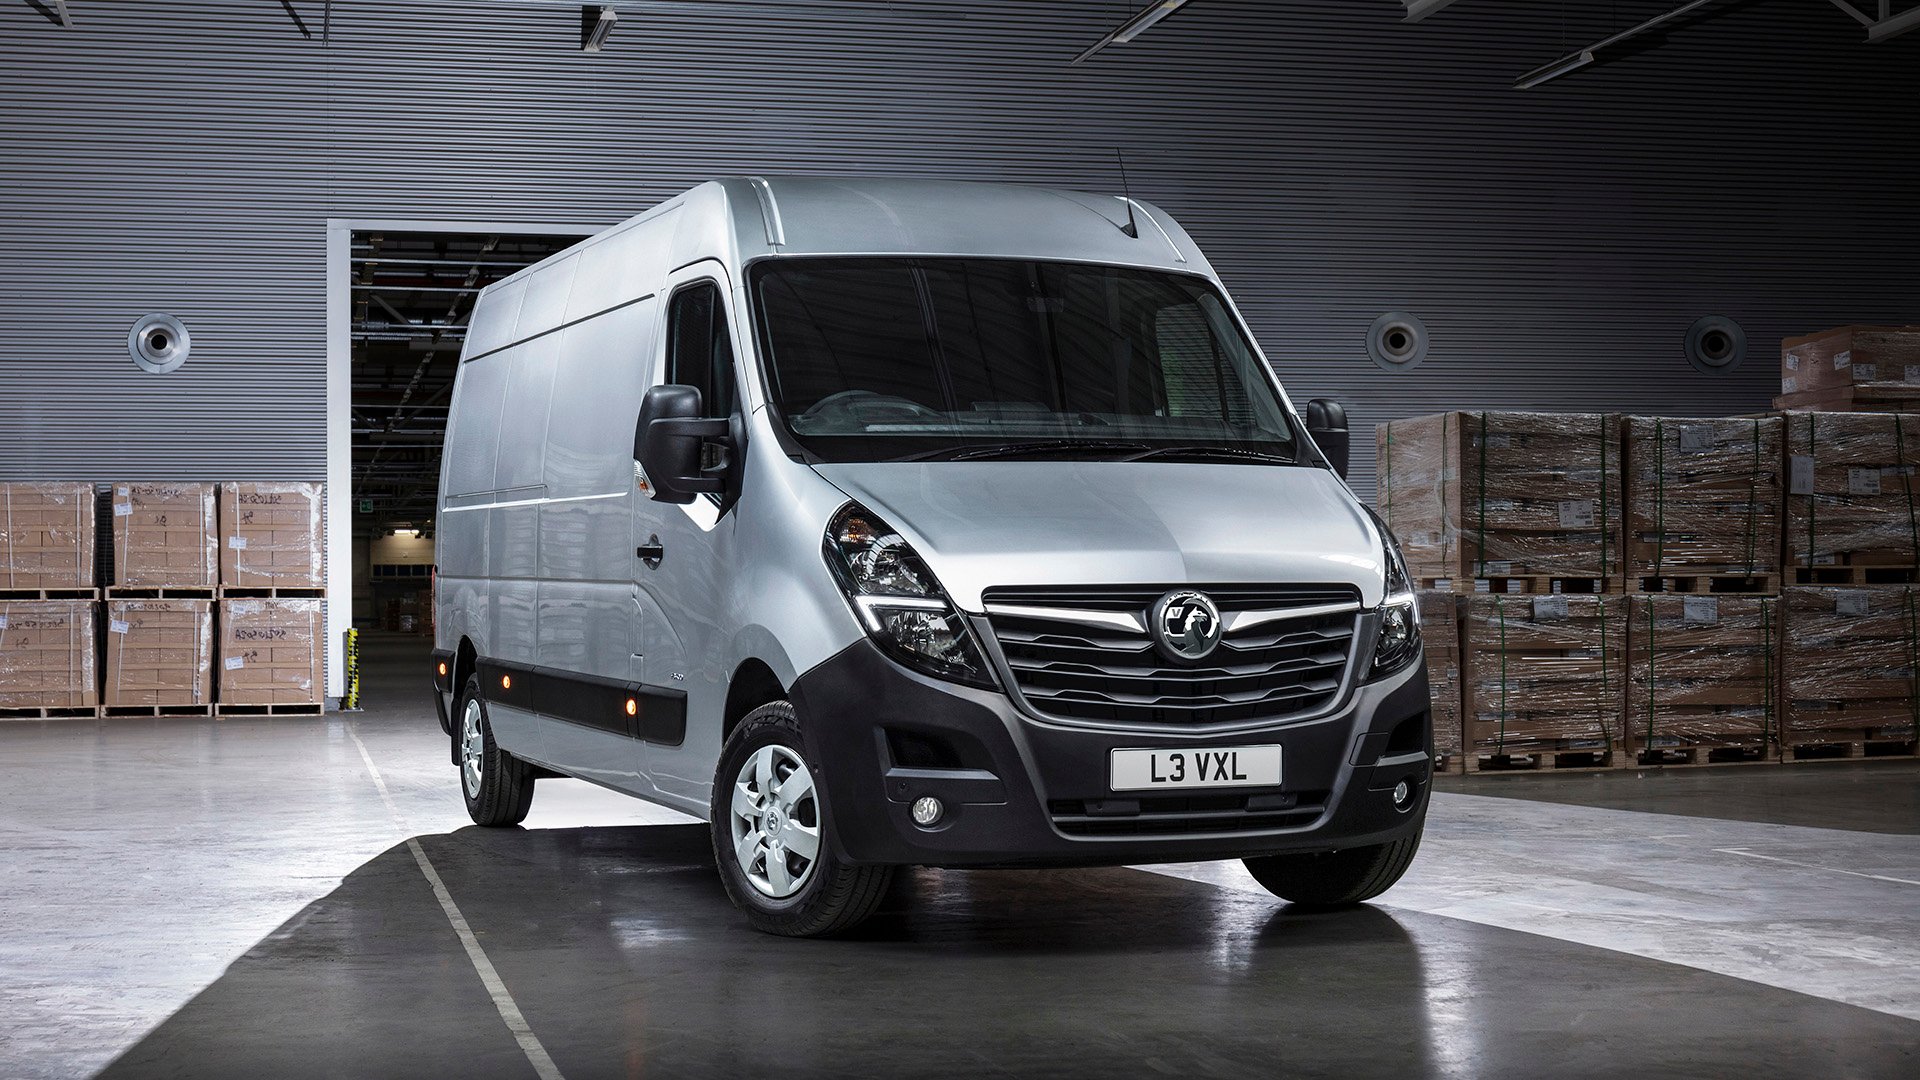 Vauxhall Movano Vans for sale in London 